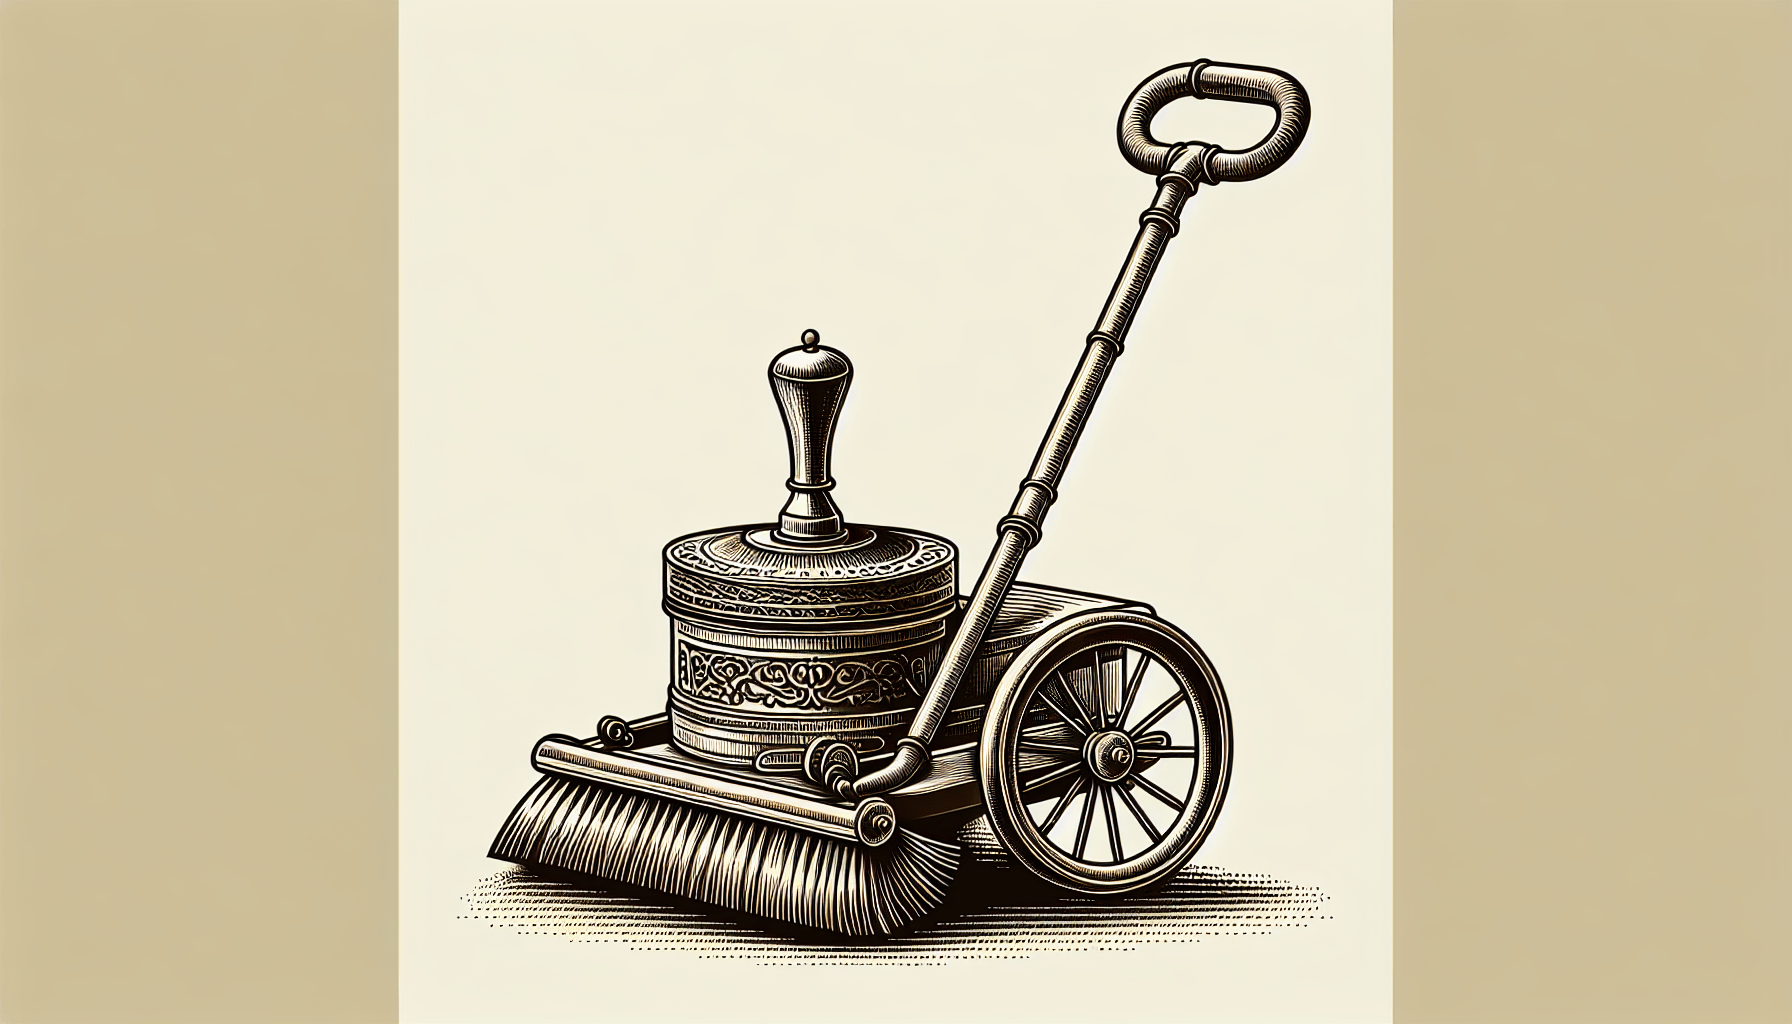 What Were Old Vacuums Called?